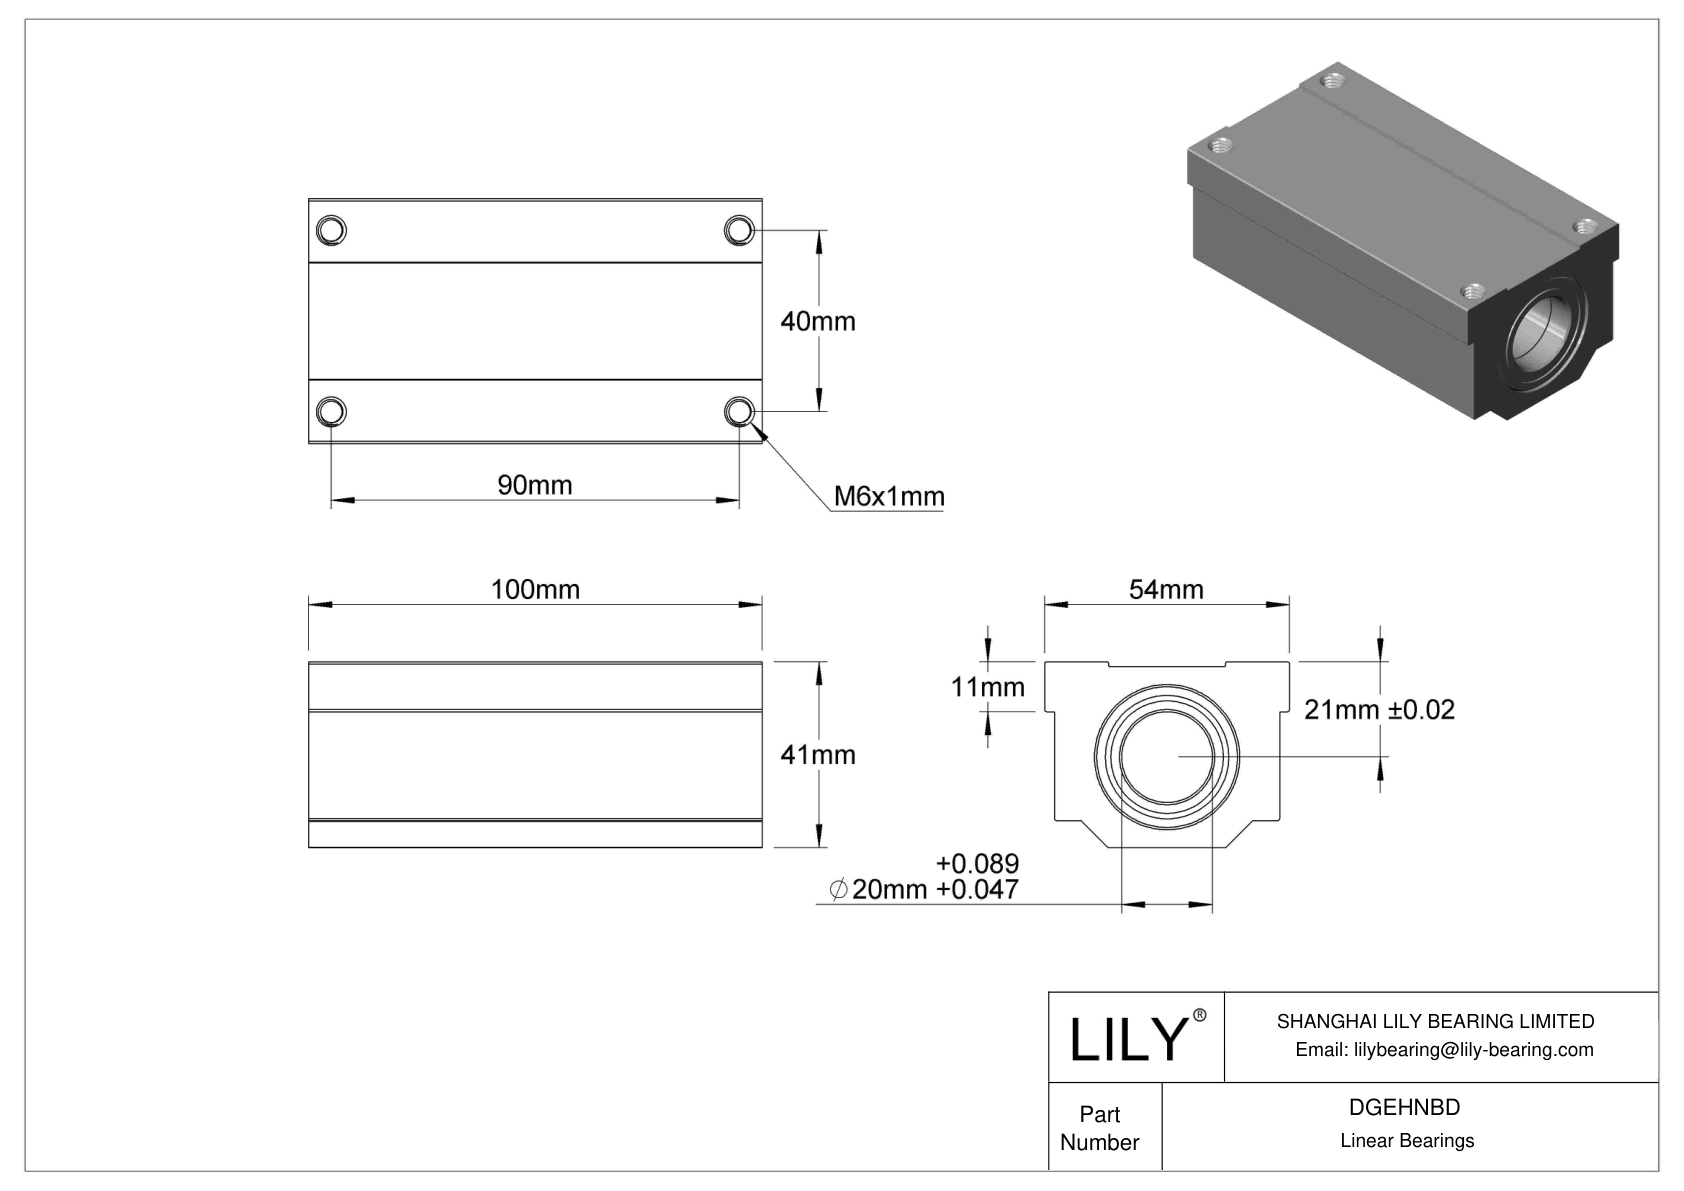 DGEHNBD High-Load High-Speed Mounted Linear Sleeve Bearings cad drawing